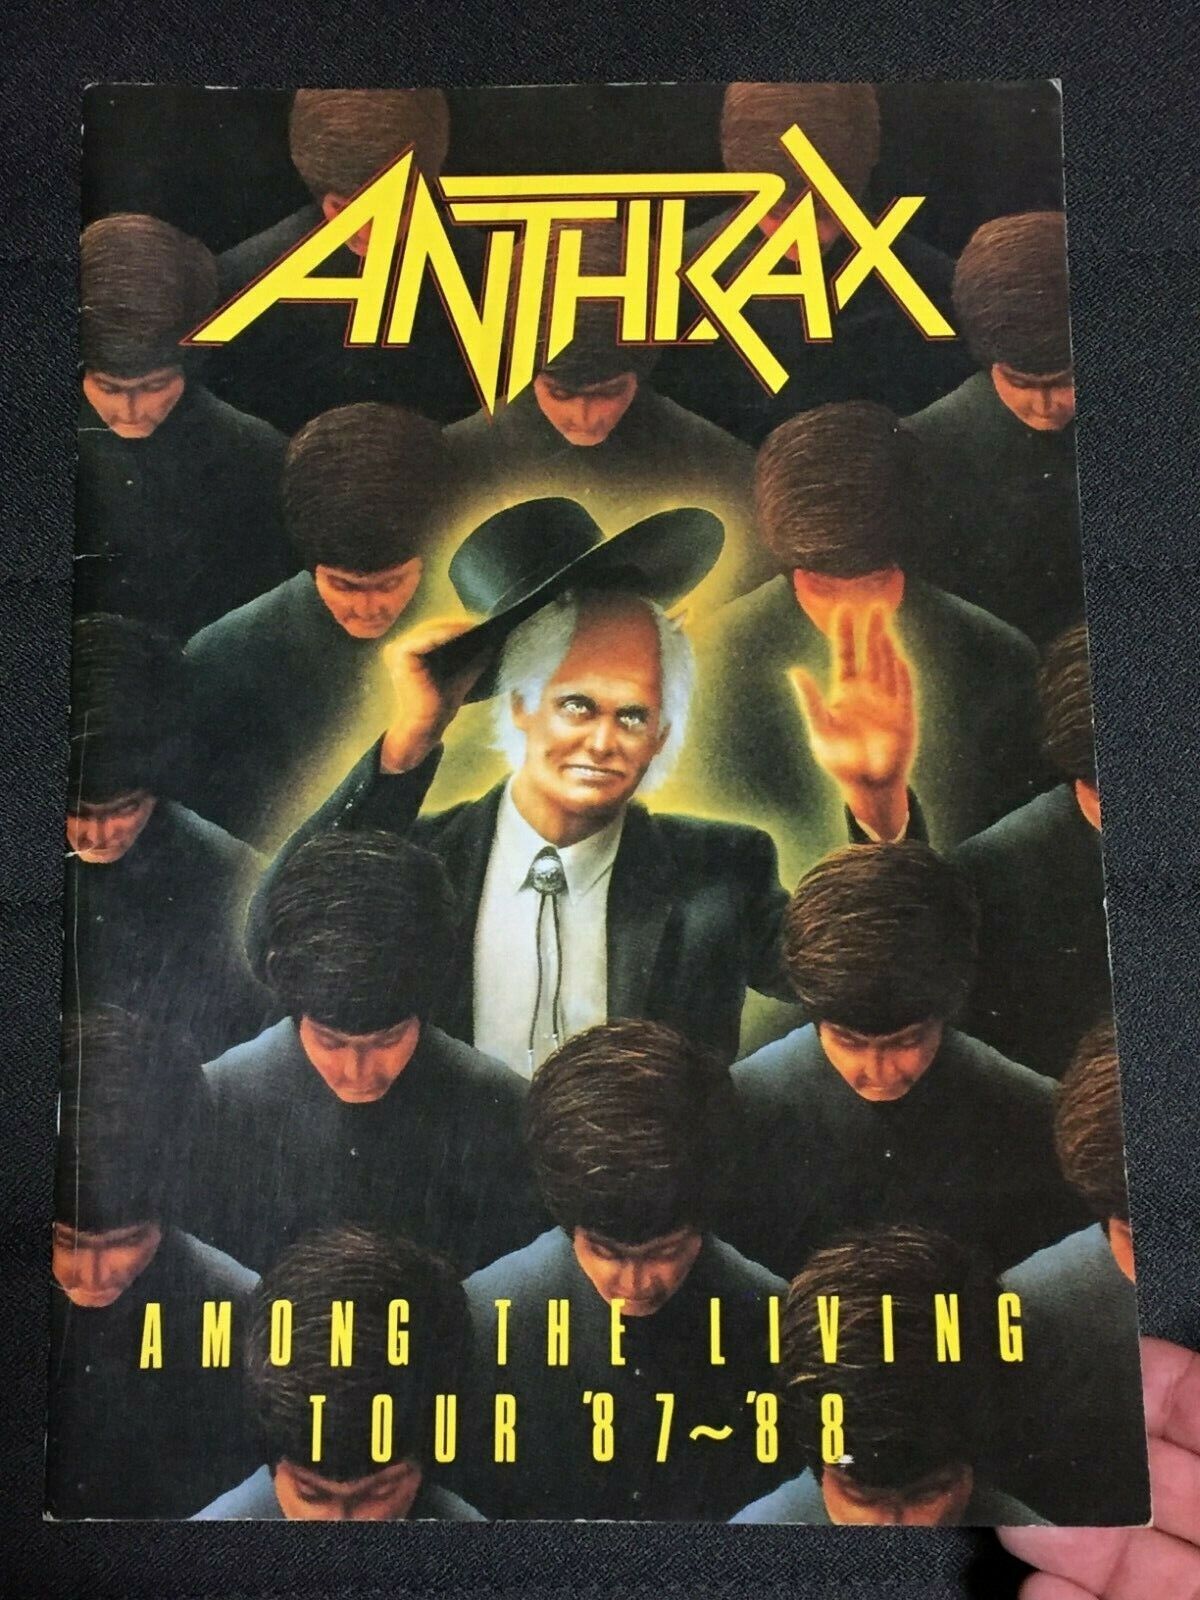 "anthrax" Tourbook Among The Living Tour 1987-88 Booklet